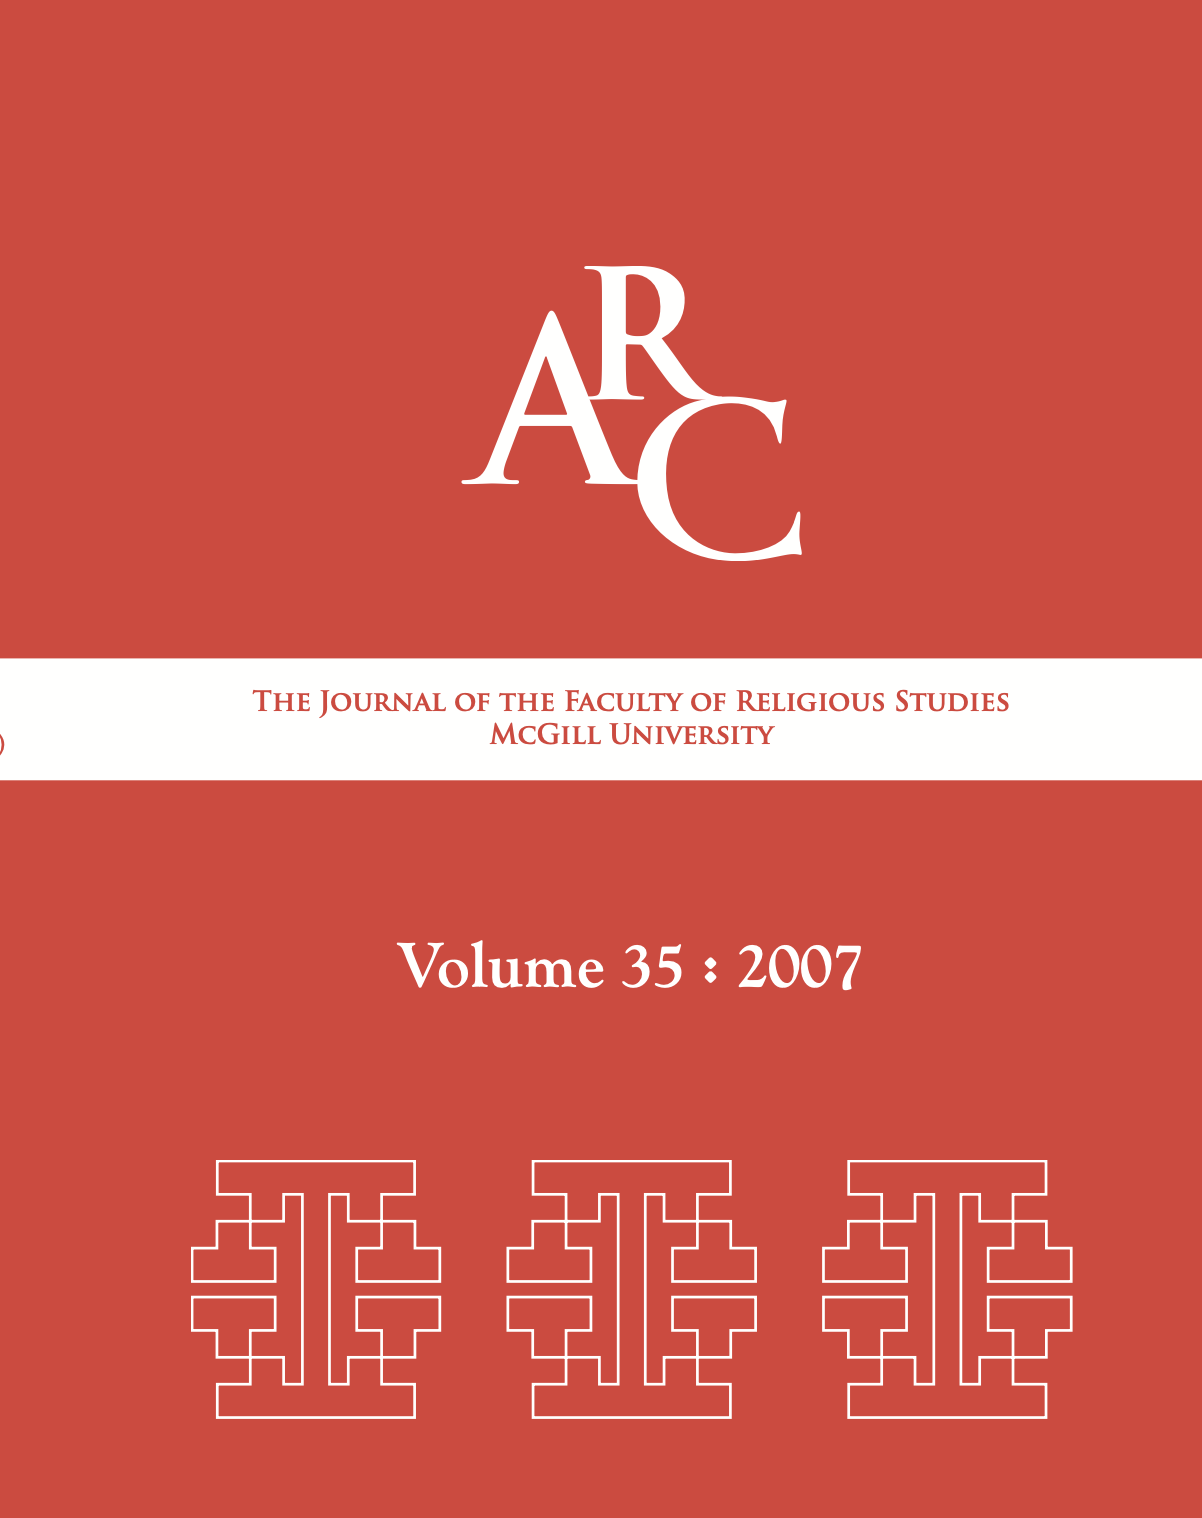 					View Vol. 35 (2007): Arc: The Journal of the Faculty of Religious Studies
				